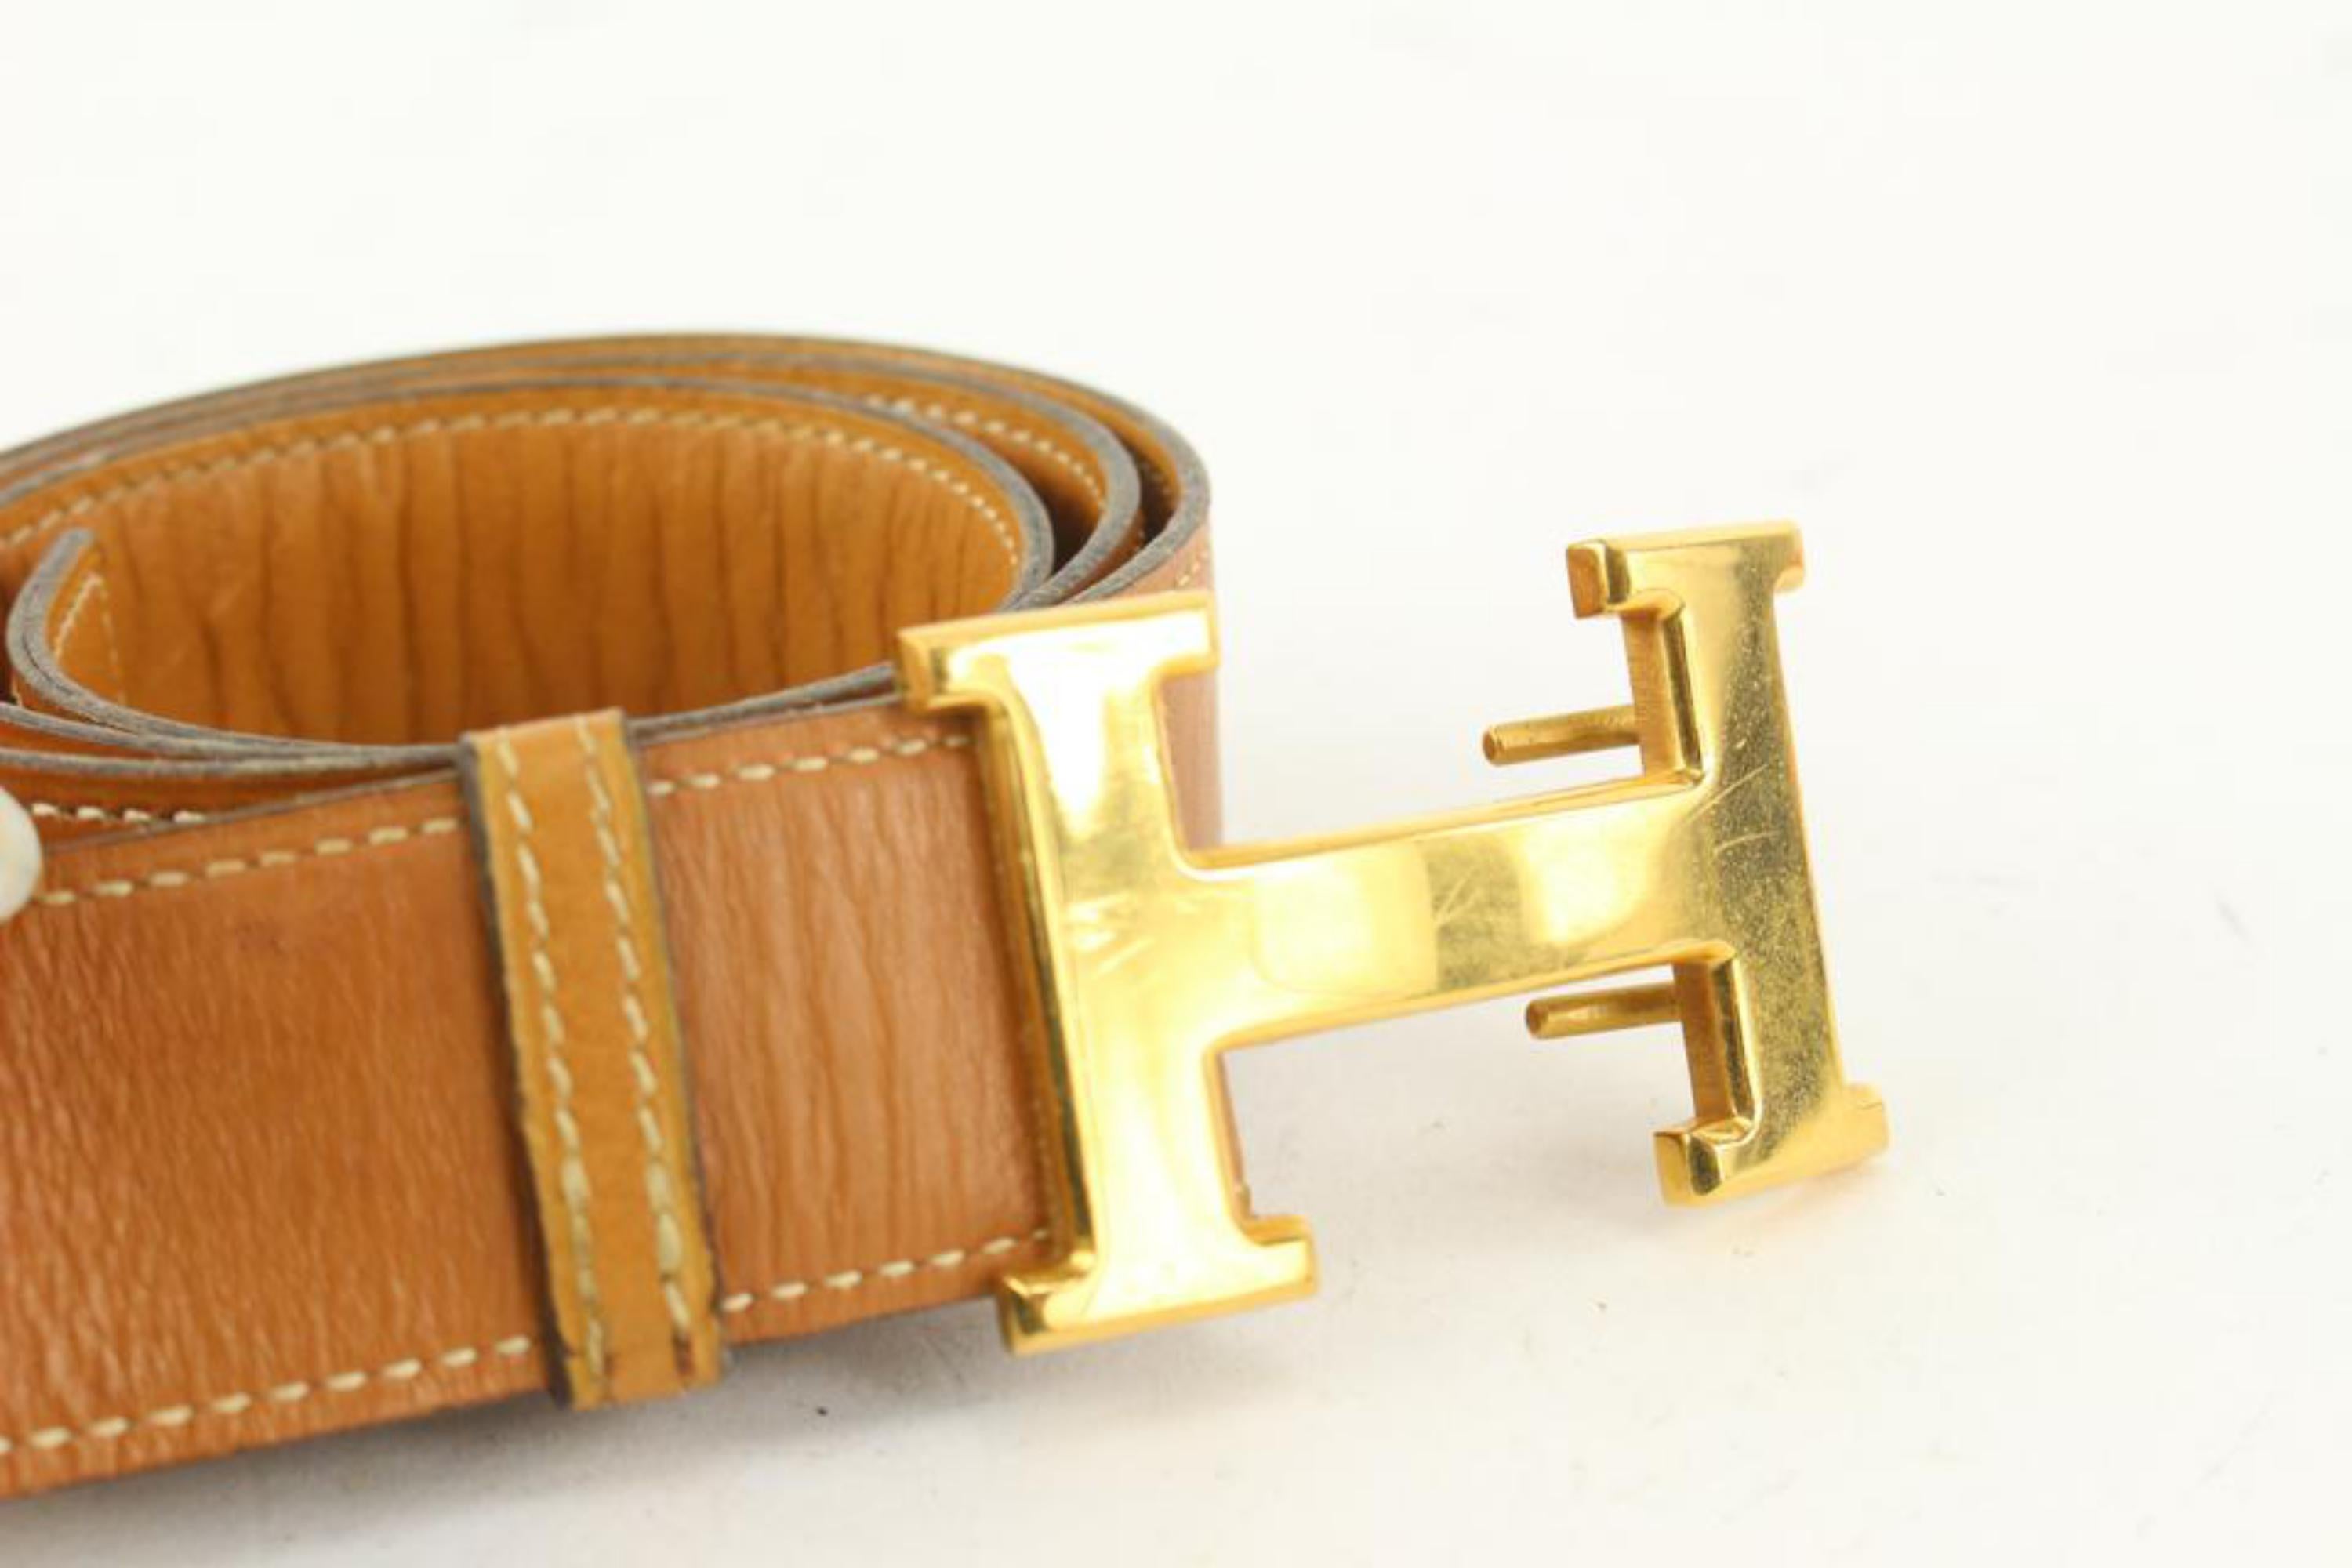 Hermès 32mm Reversible H Logo Belt Kit Brown x Gold 927her49 In Fair Condition For Sale In Dix hills, NY